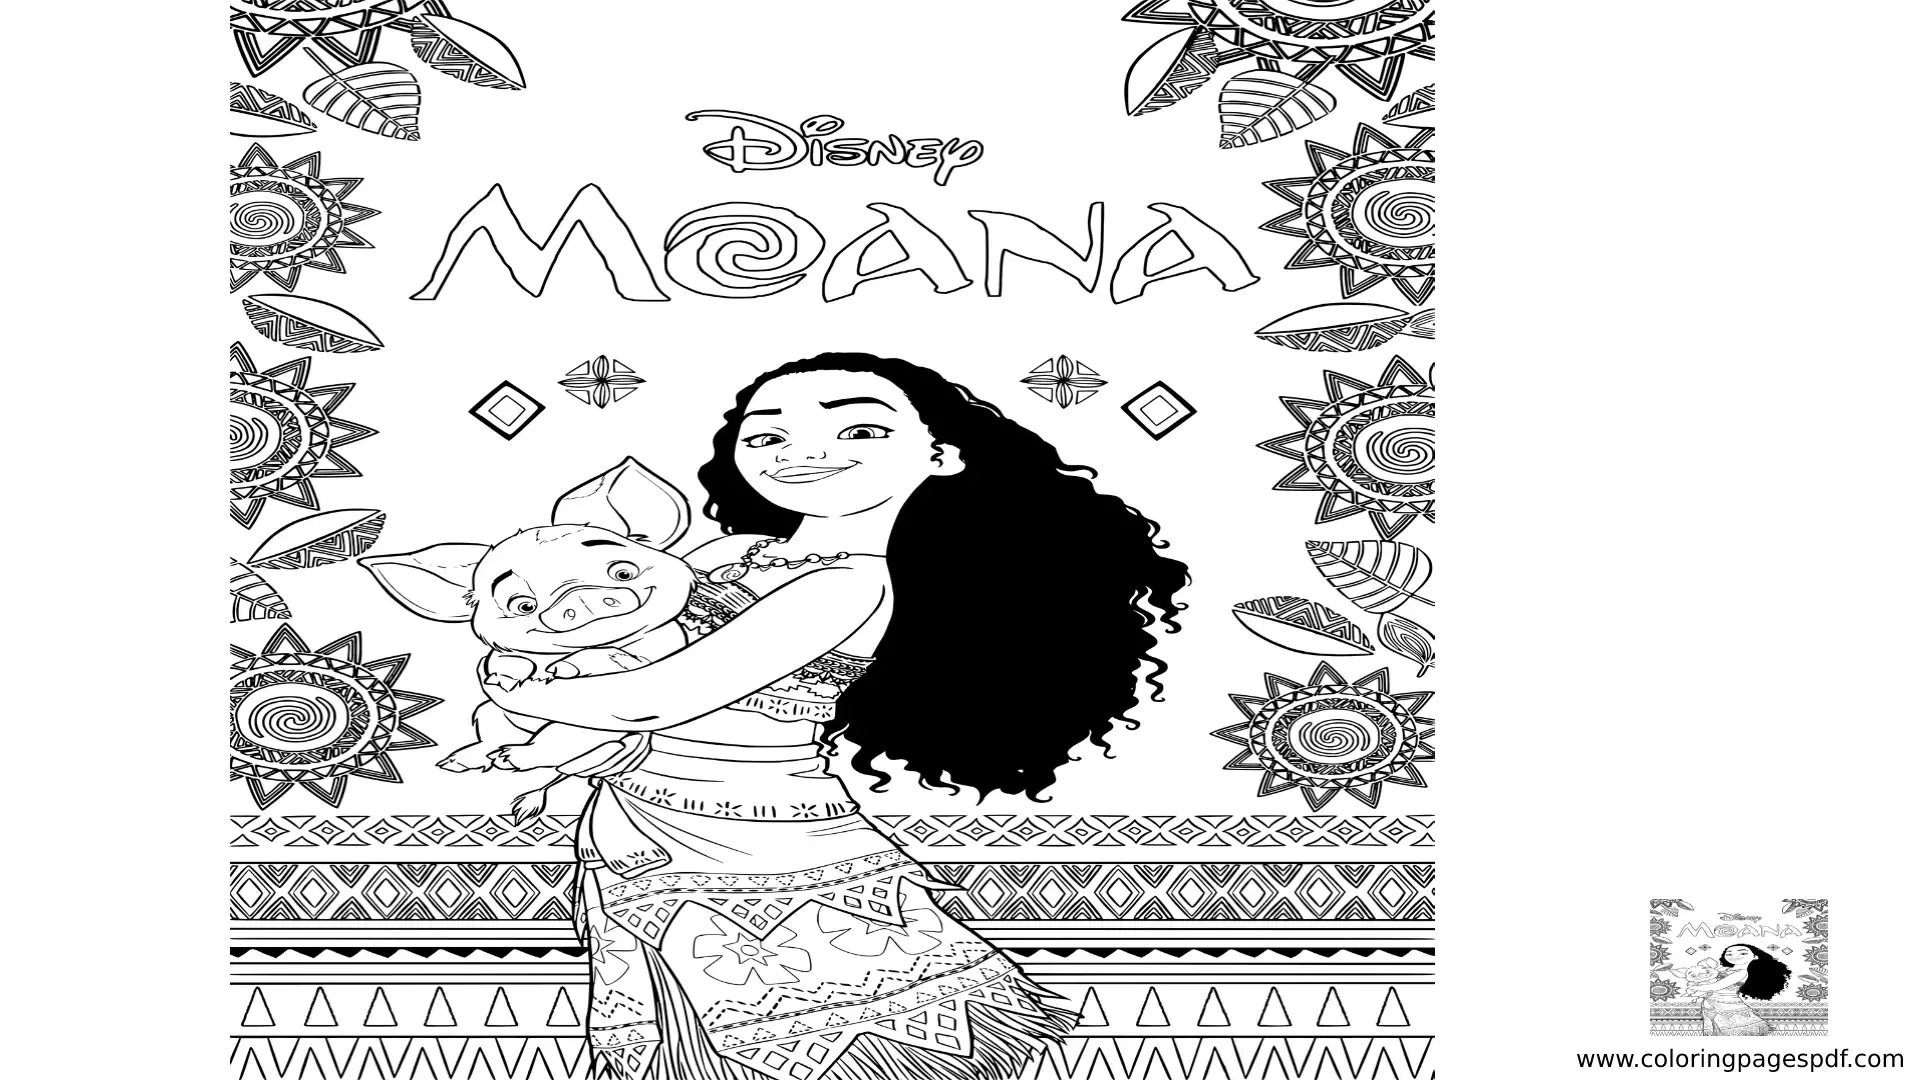 Coloring Pages Of The Movie Poster Moana